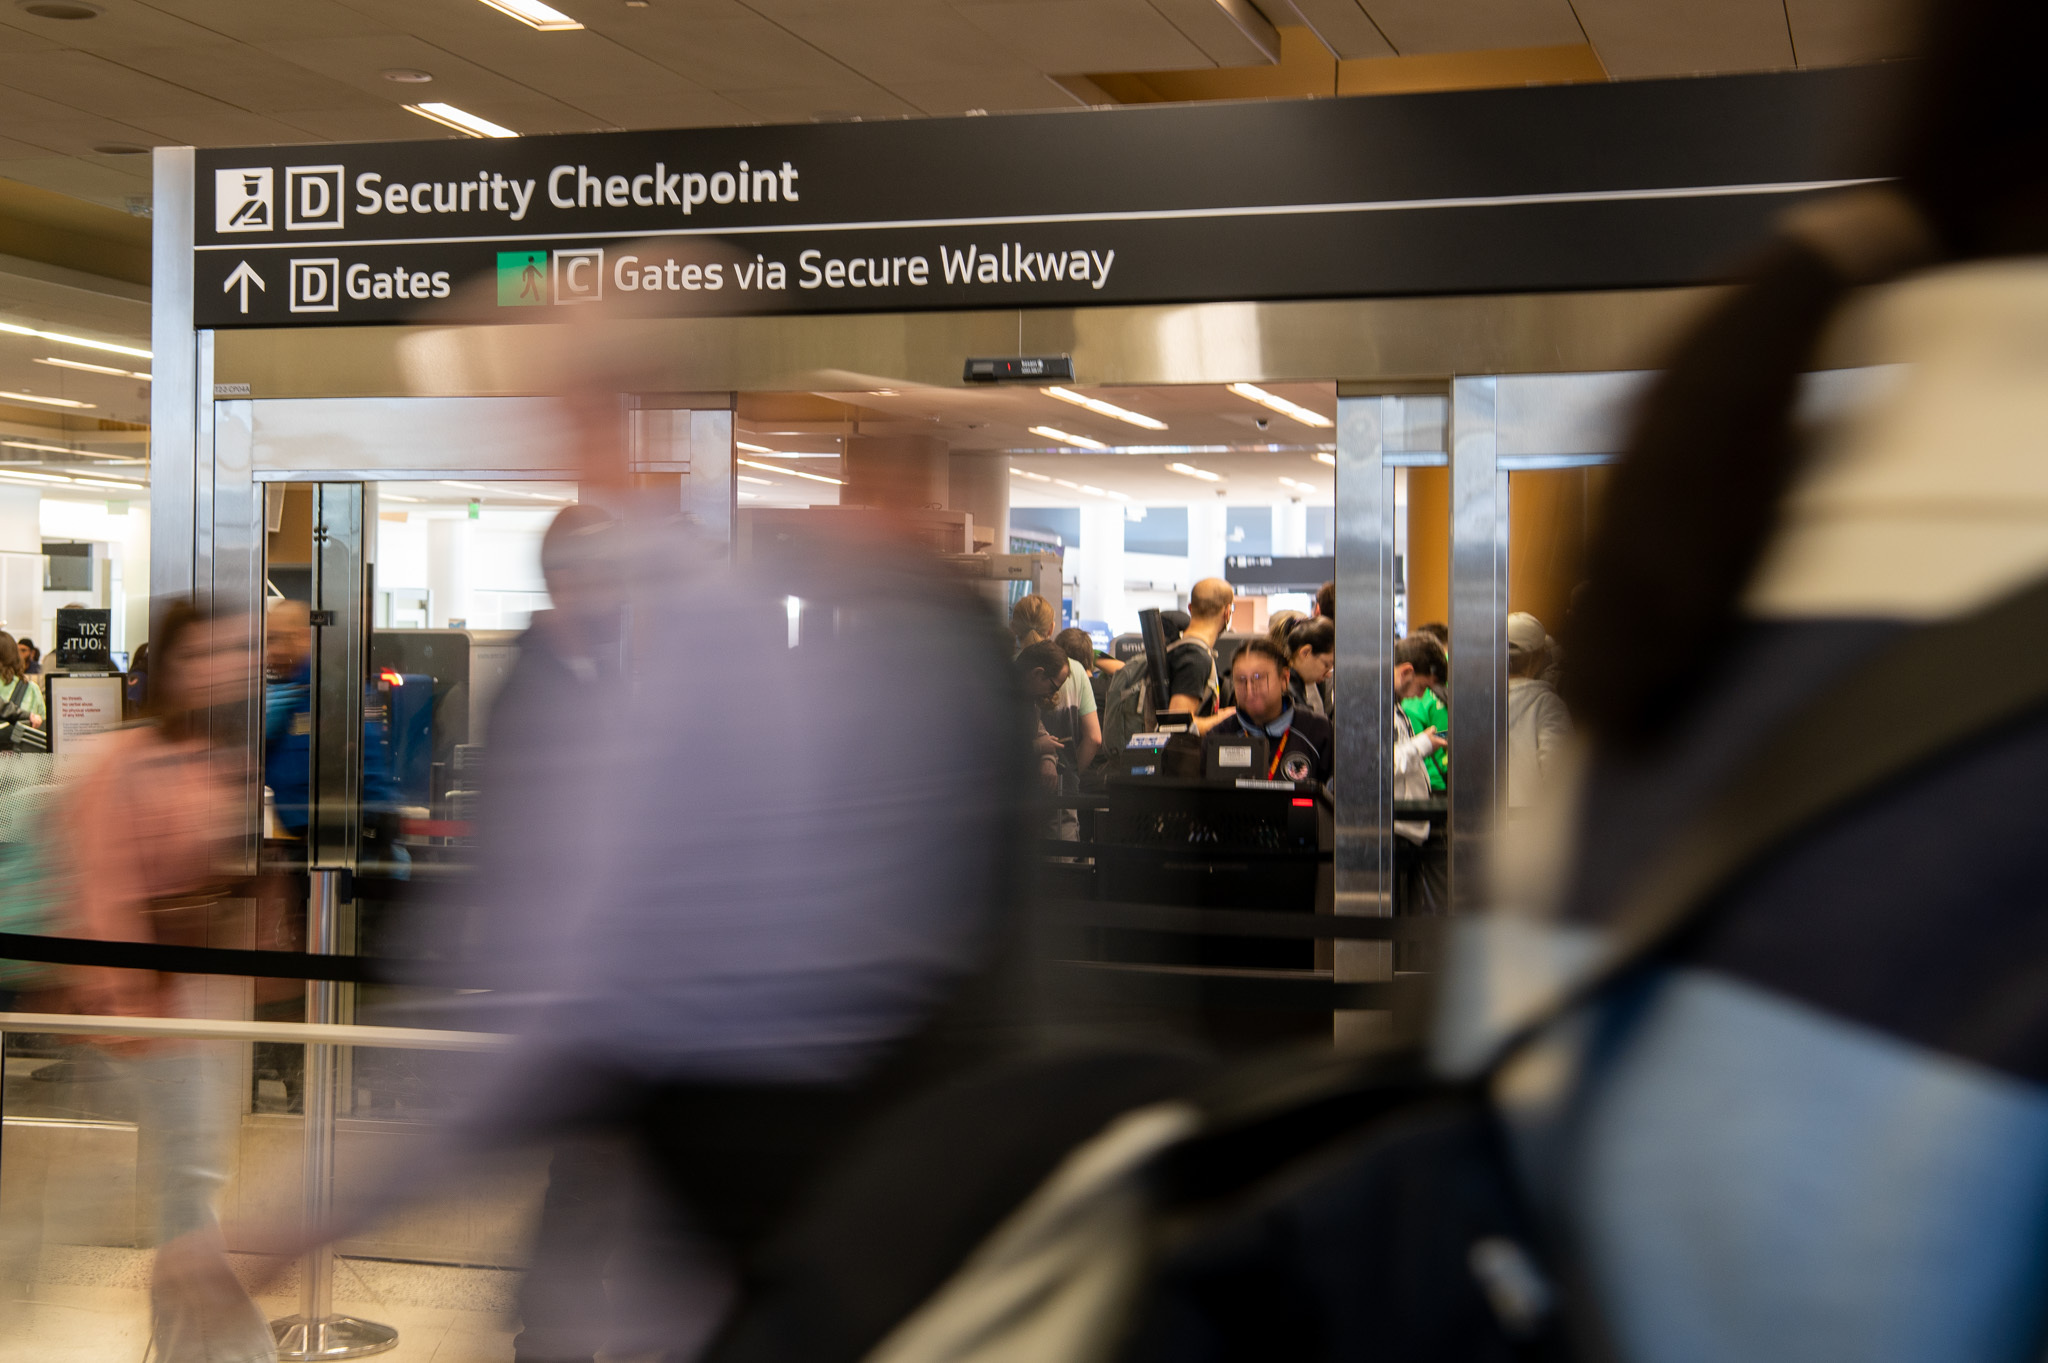 A security checkpoint as people wait in line and TSA agents checking boarding passes and id's.